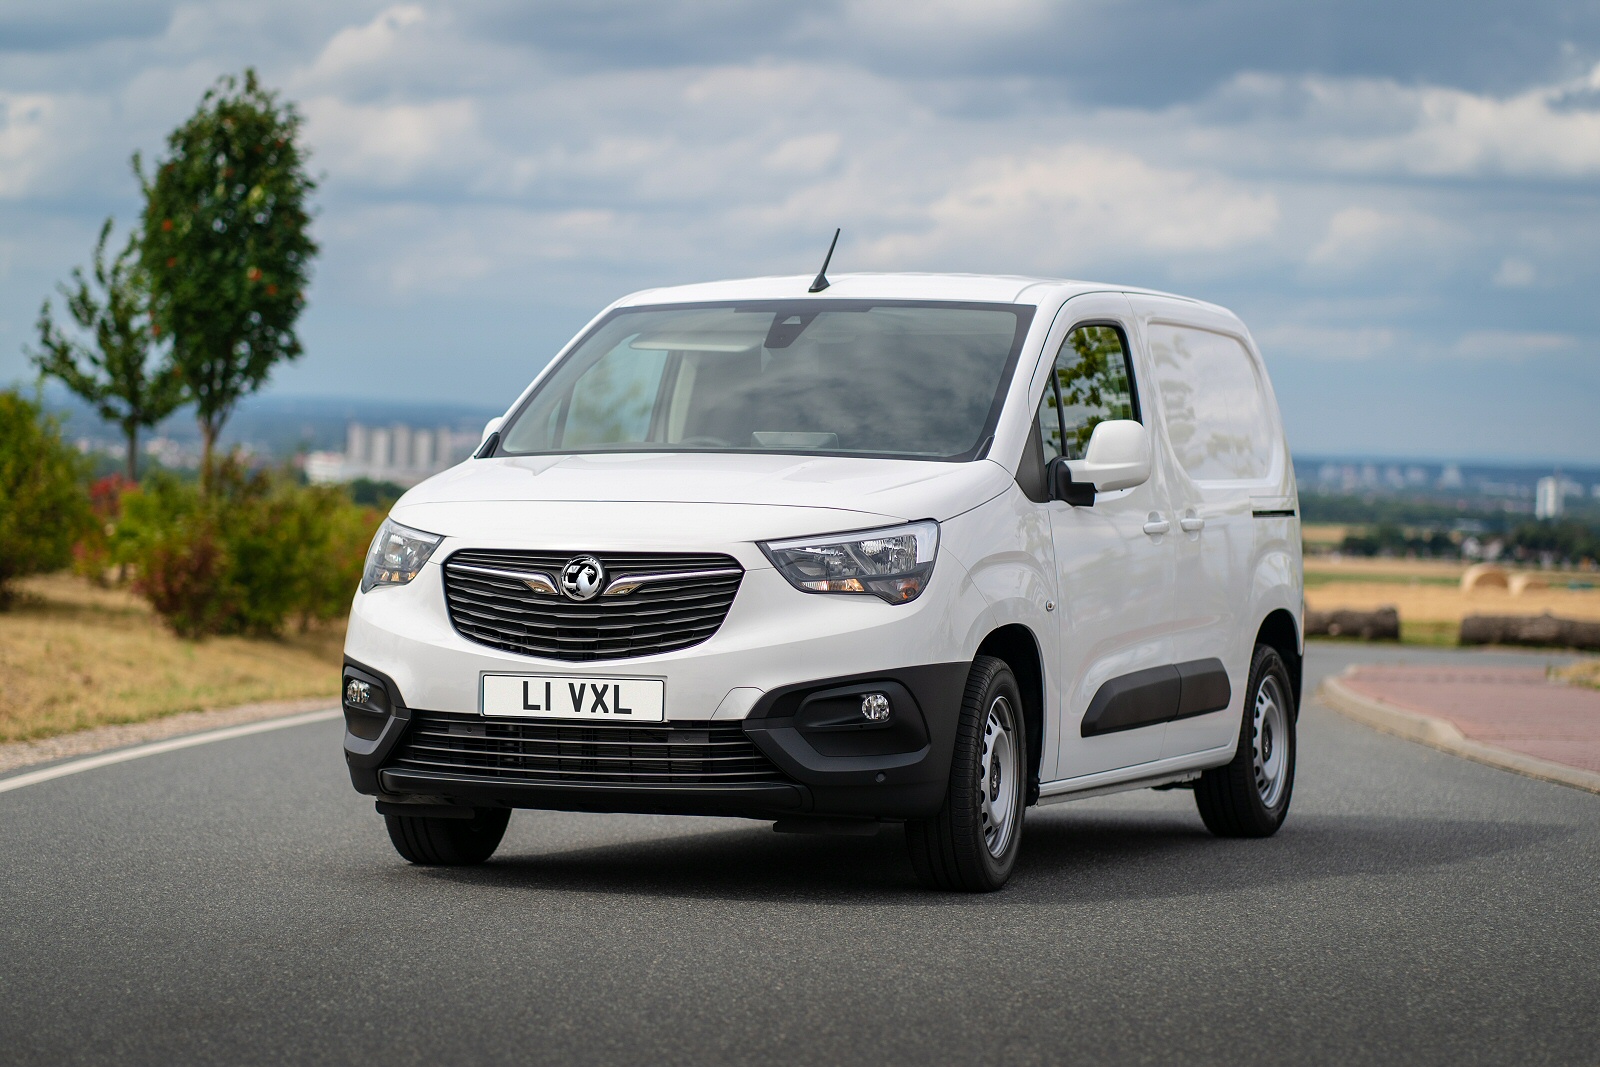 VAUXHALL Electric Lease